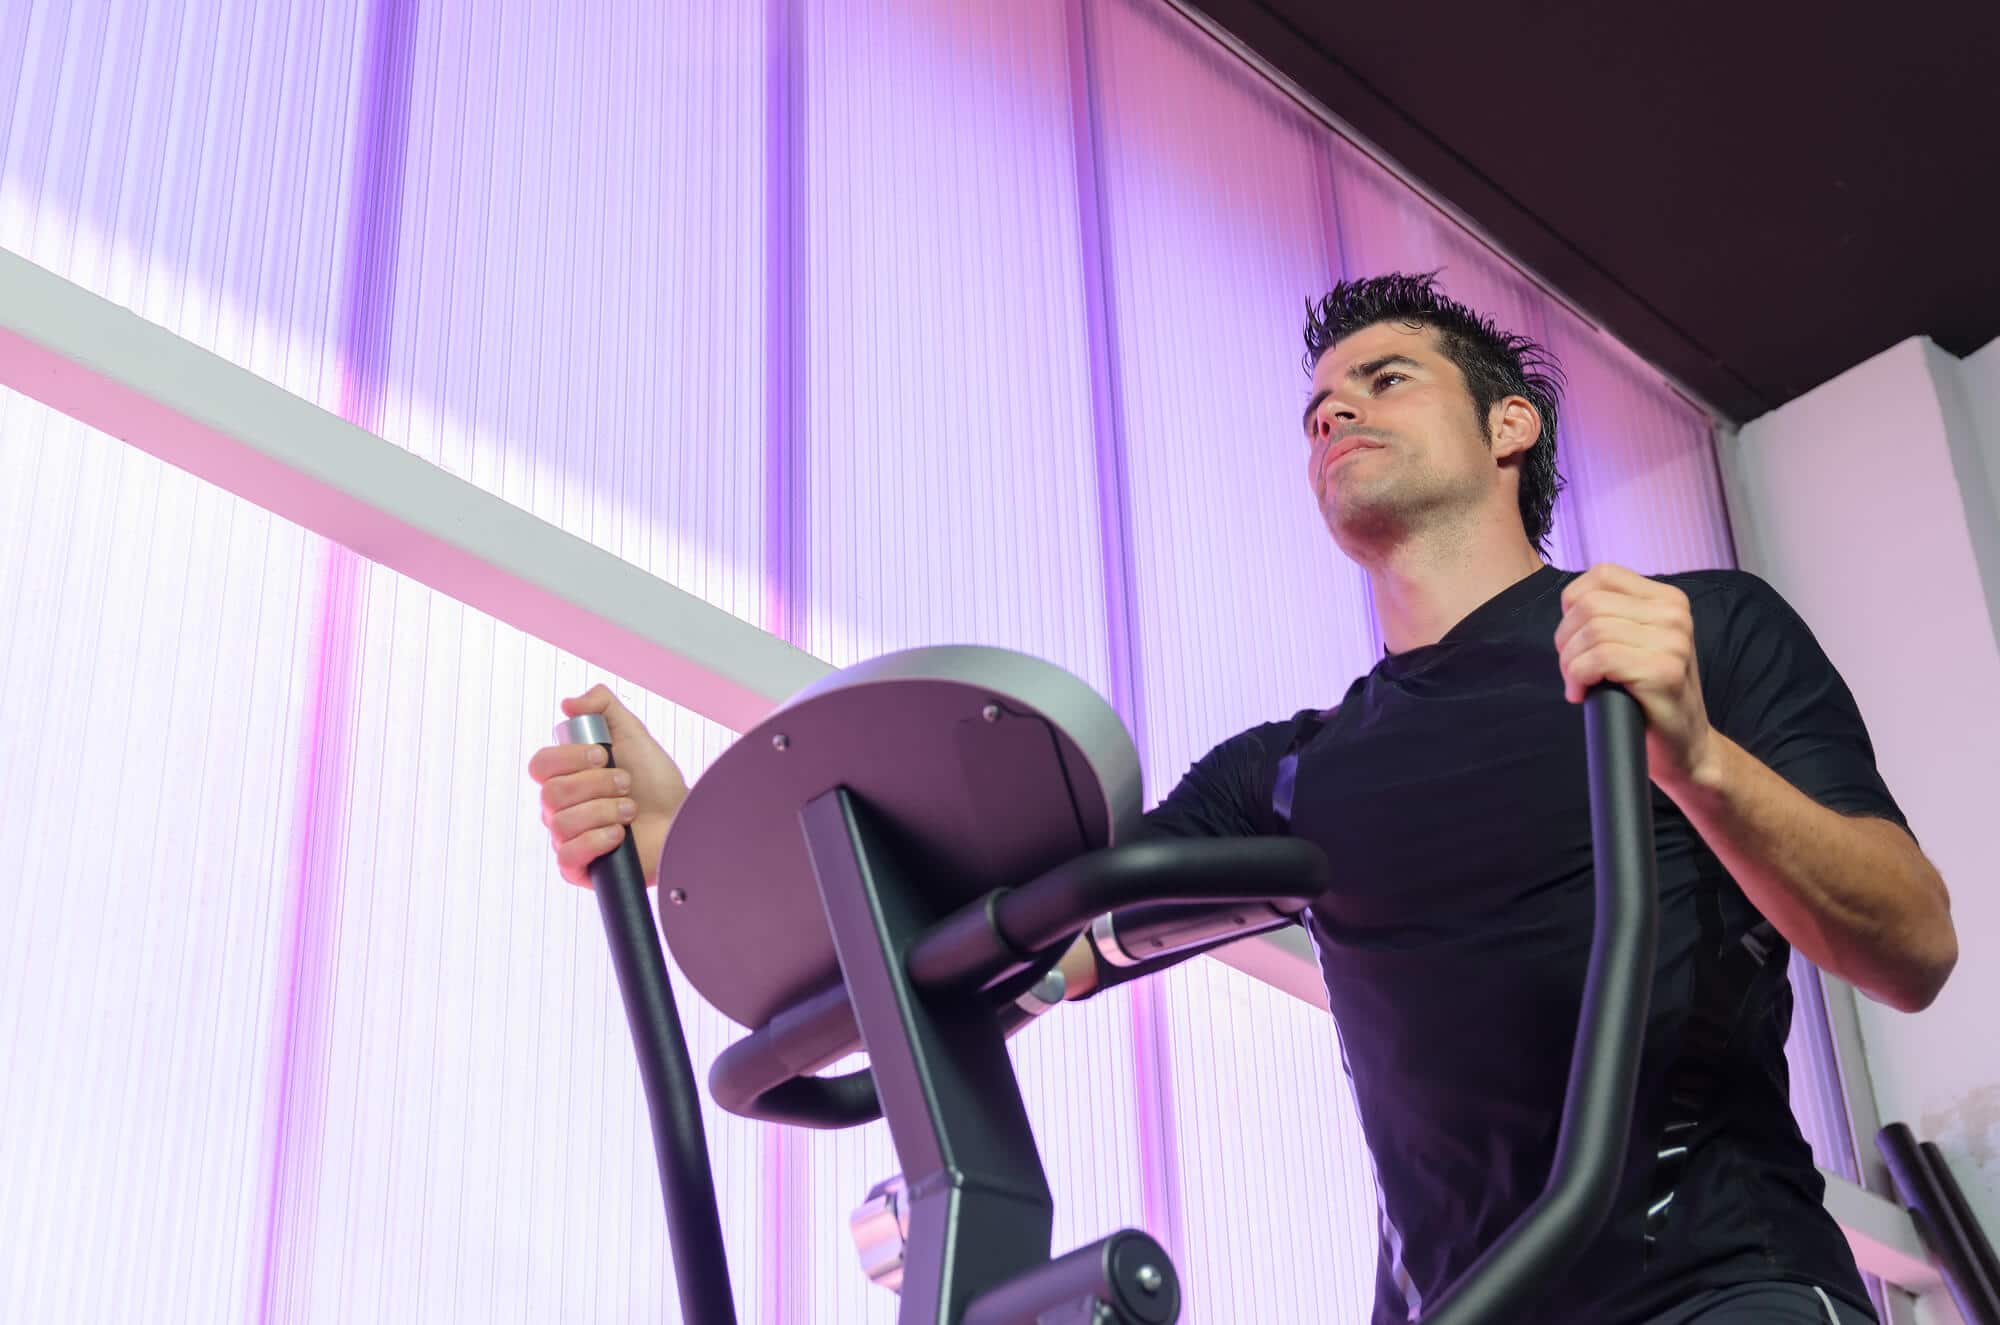 How to Use an Elliptical Machine: The Beginner-Friendly Guide